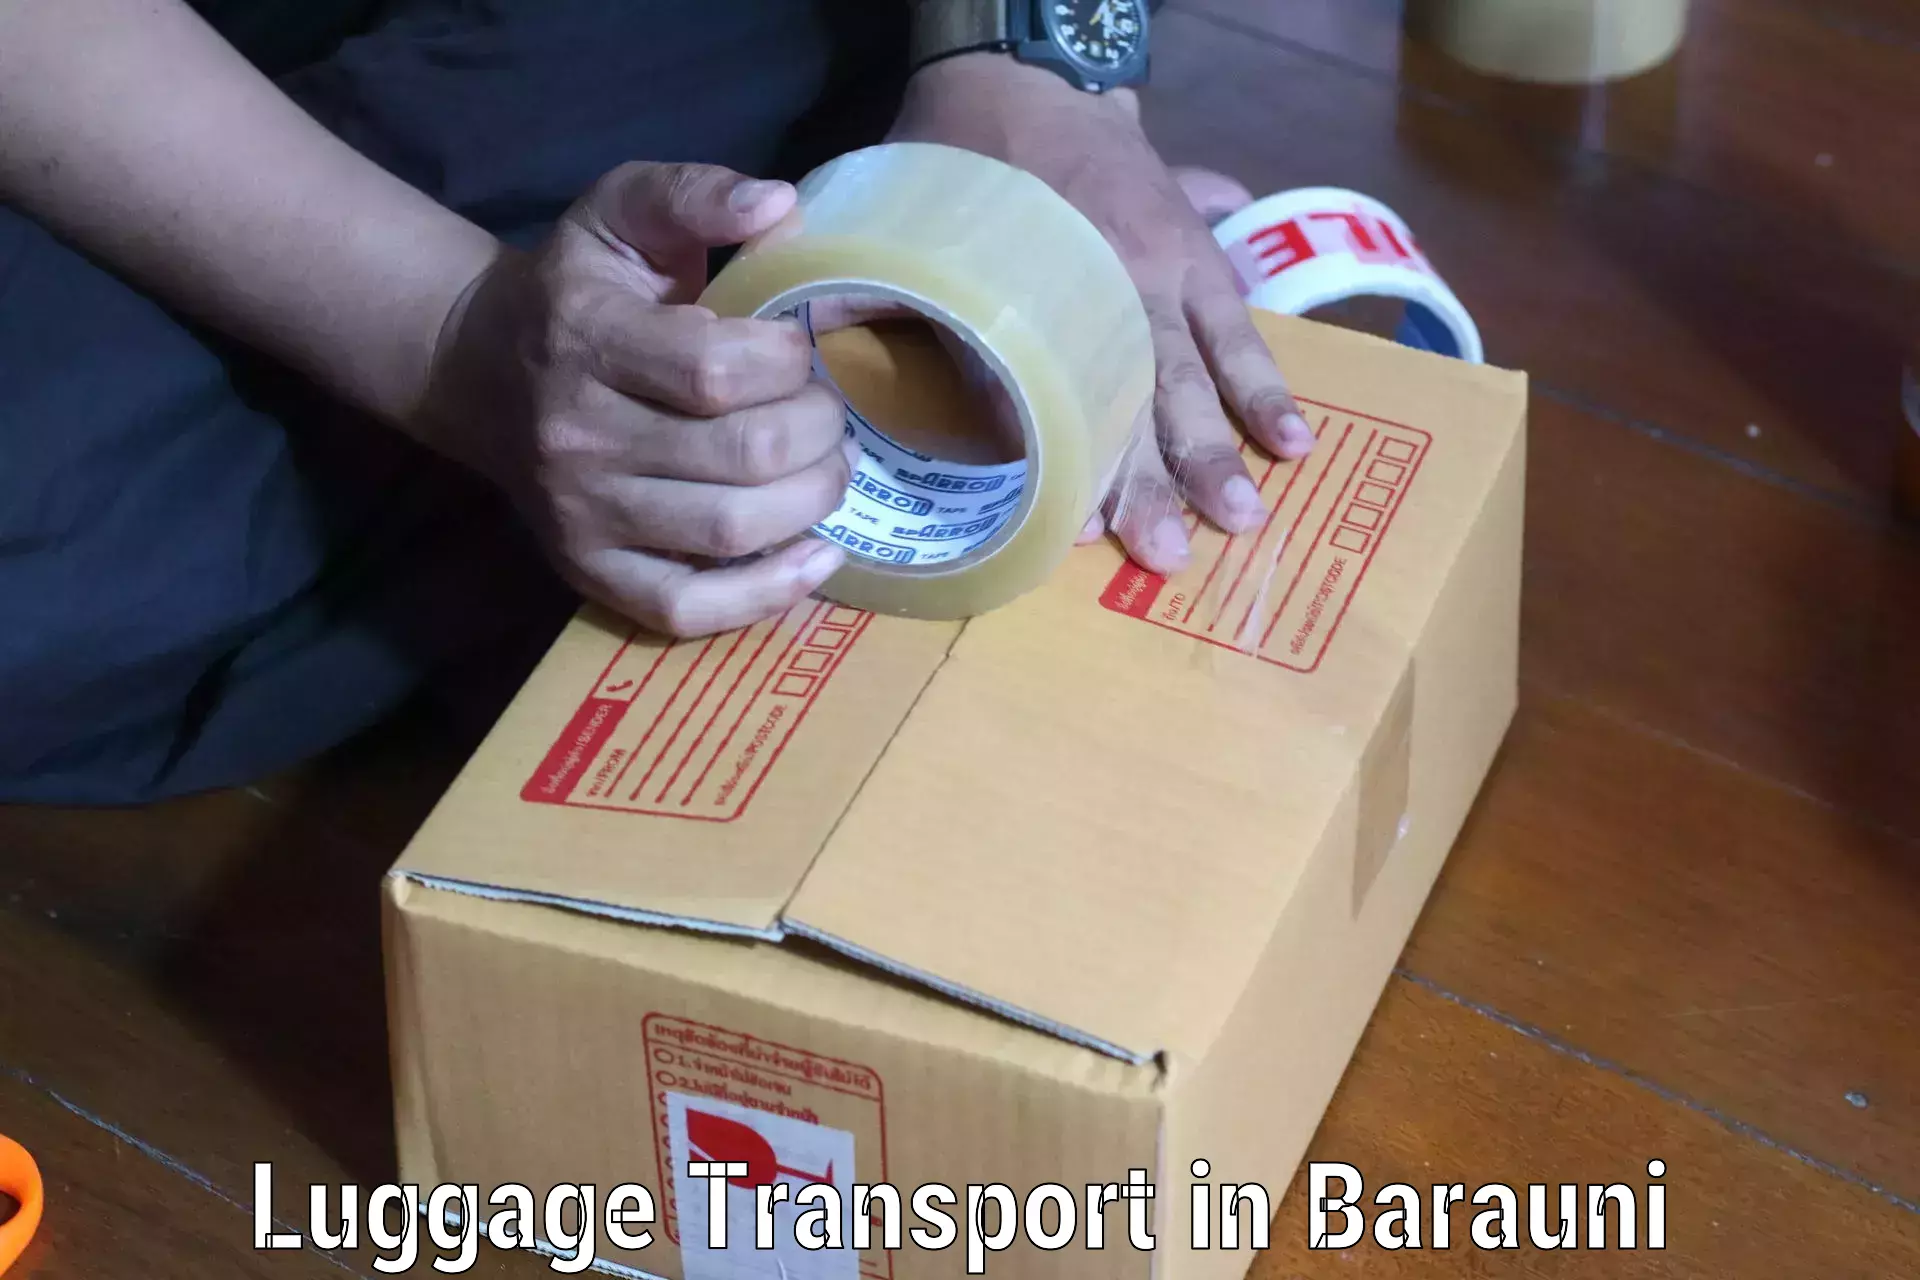 Luggage transport solutions in Barauni